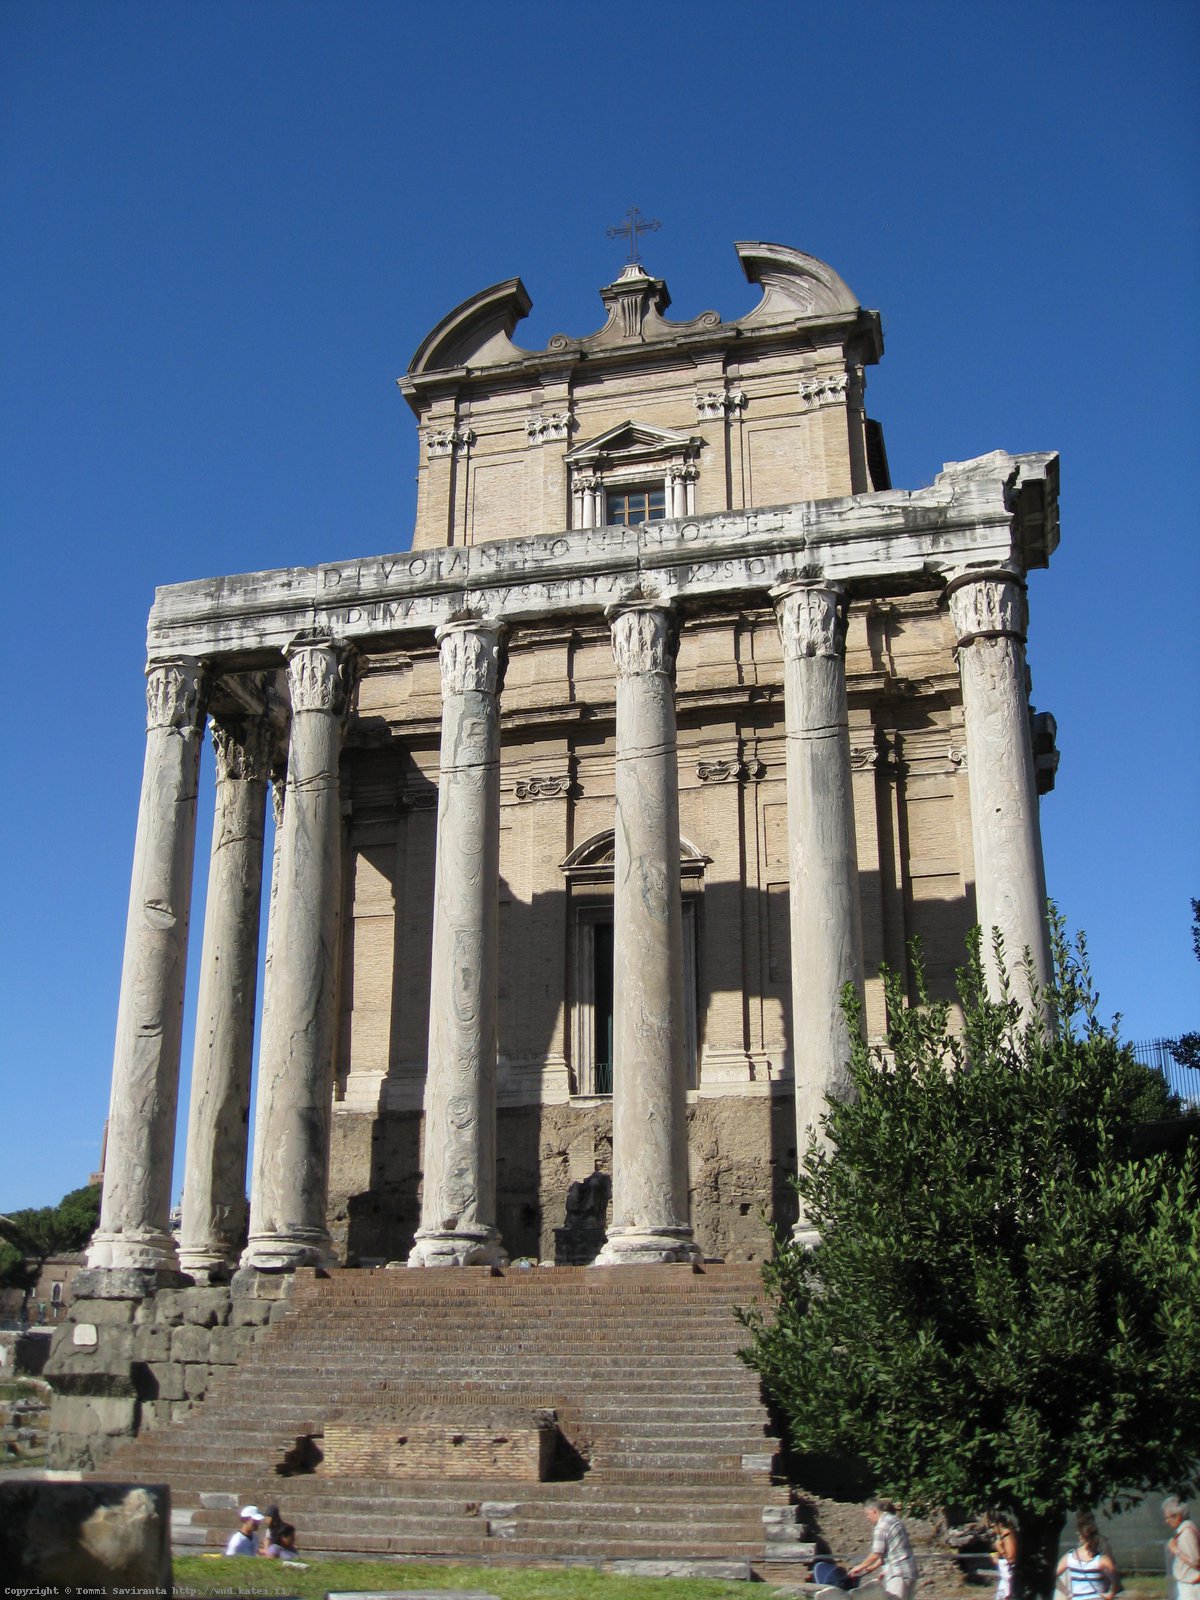 Day #2: Temple of Antoninus and Faustina